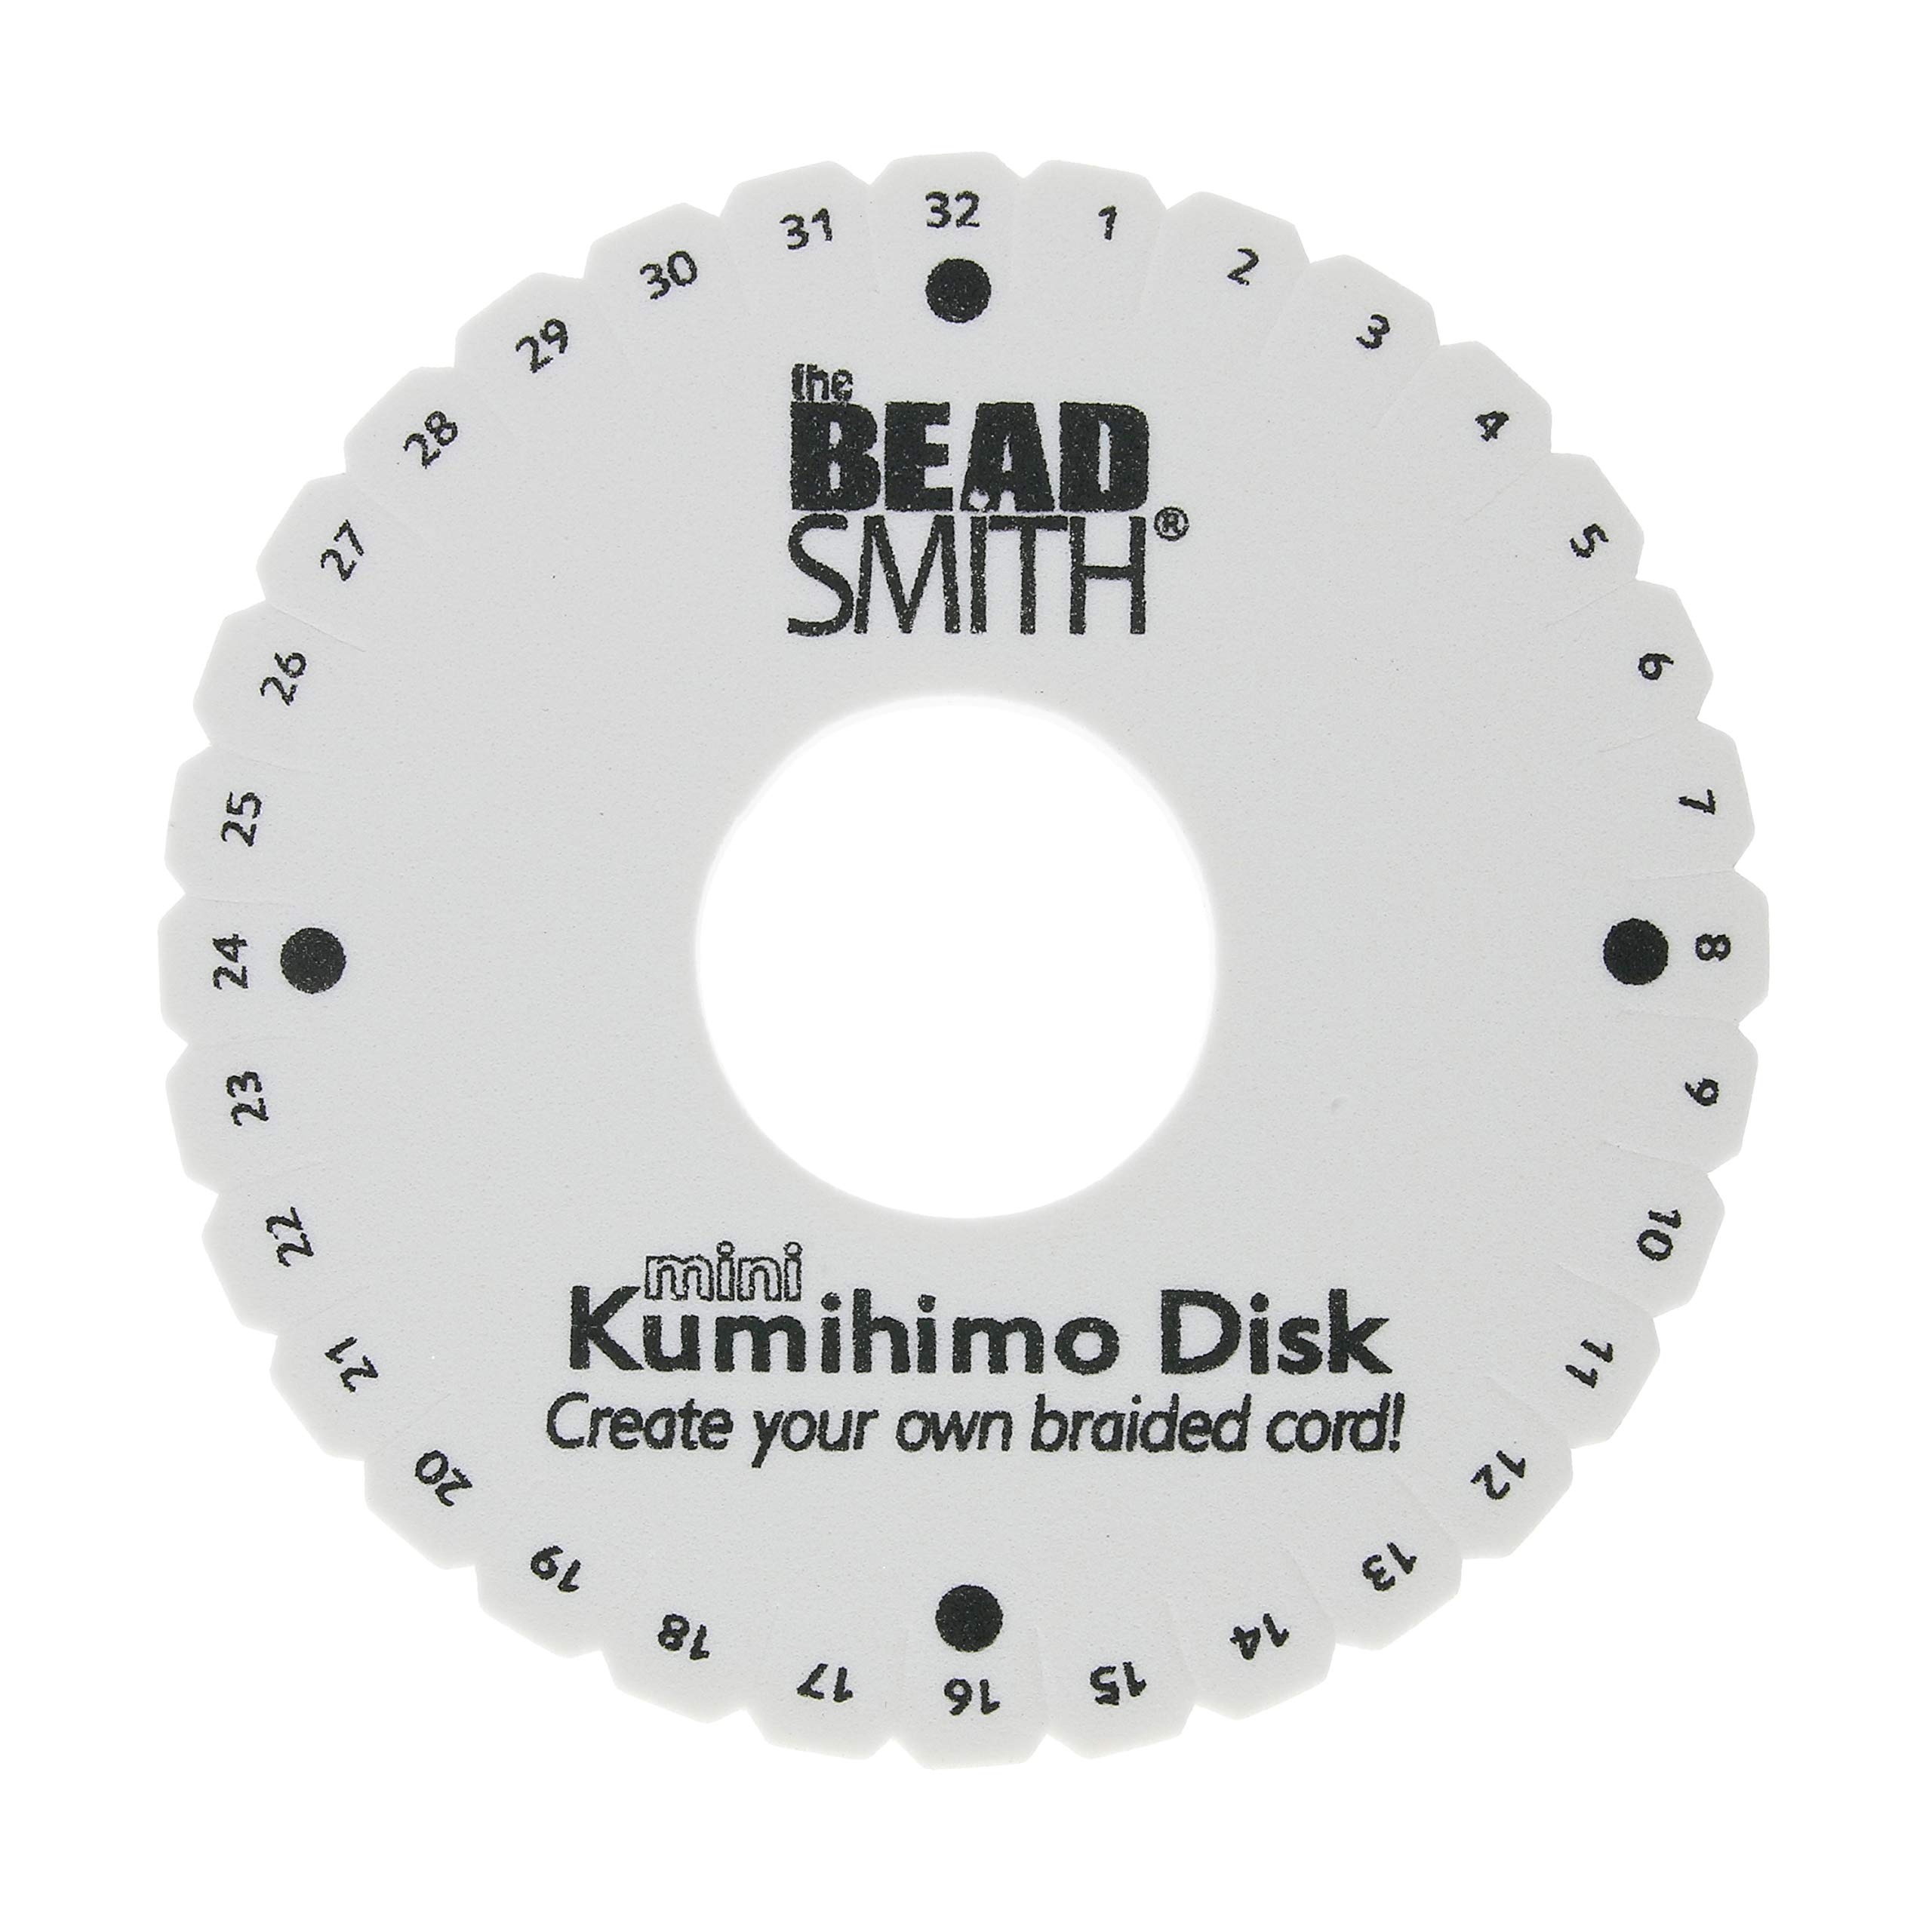 The Beadsmith Round Kumihimo Disk, 4.5 inch Diameter, 3/8” Thick Dense Foam, Jewelry Tools for Braiding, 1 disks